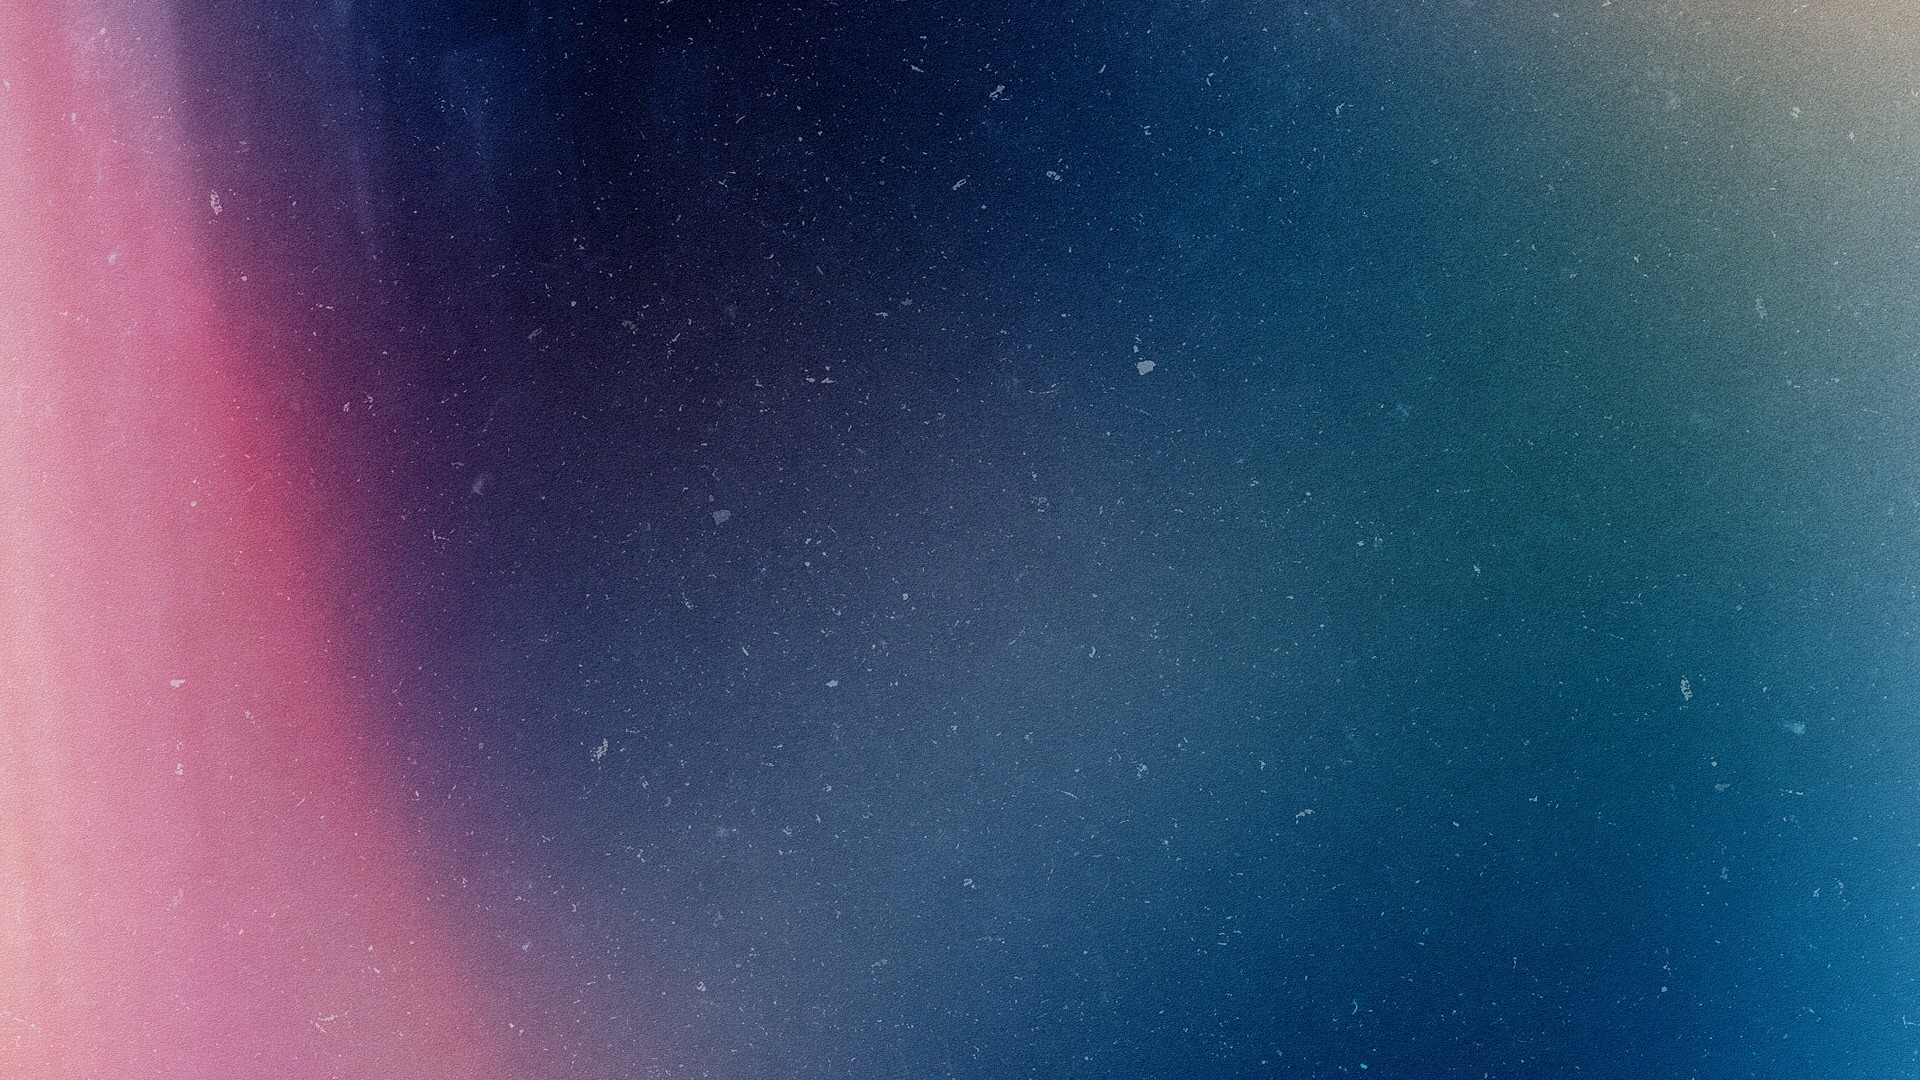 colorful, Abstract Wallpaper